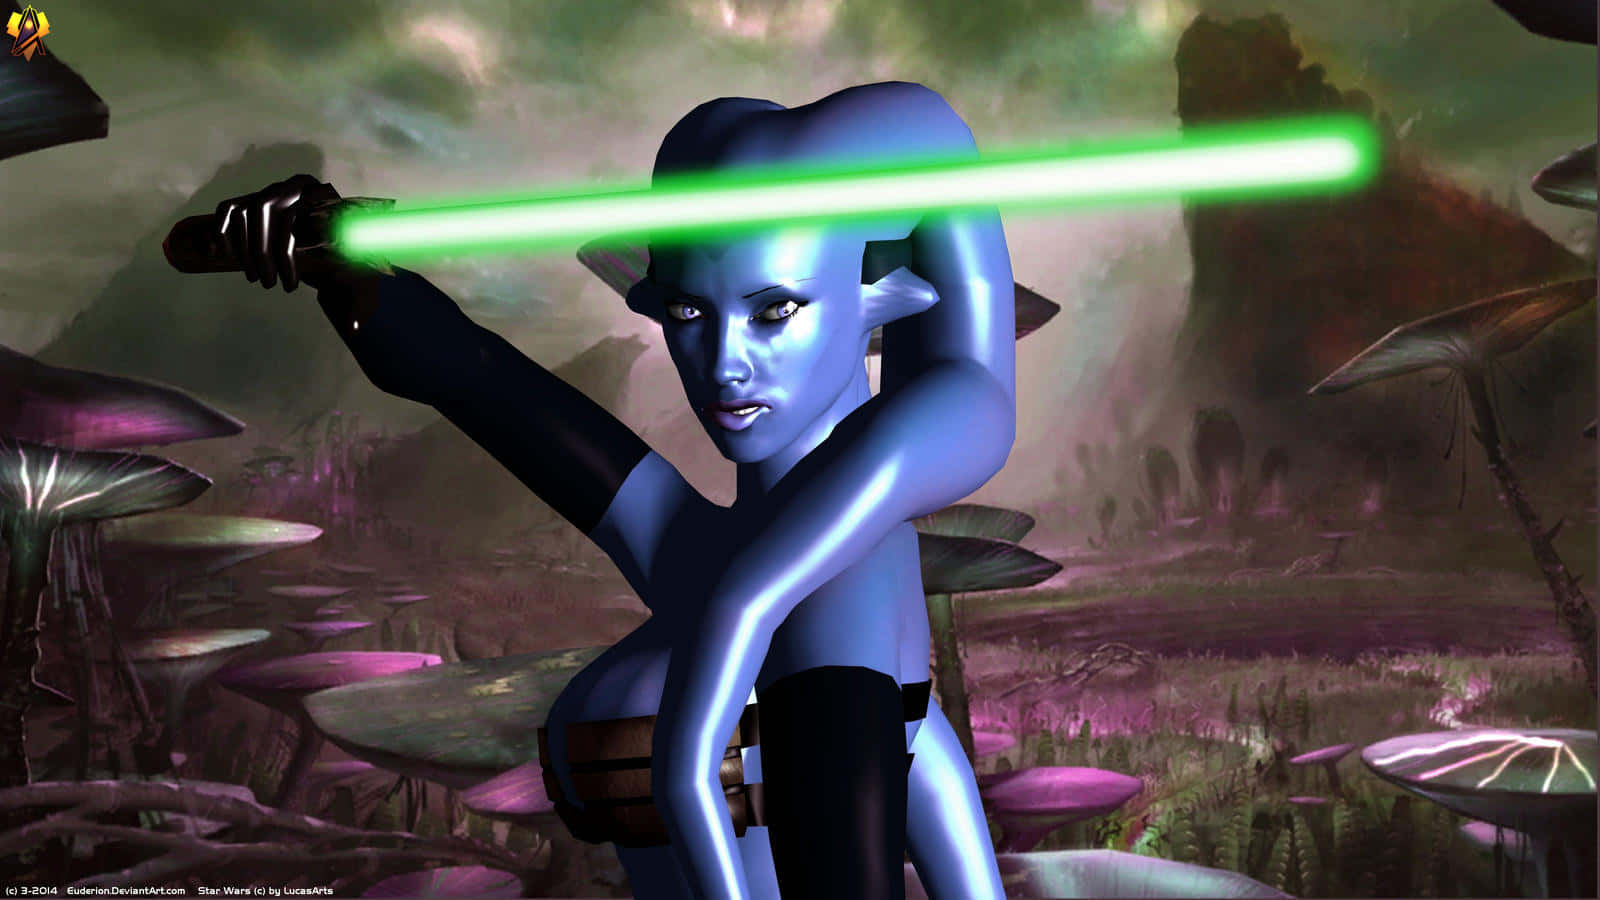 A Twi'lek Character with Scarf and Robes Wallpaper